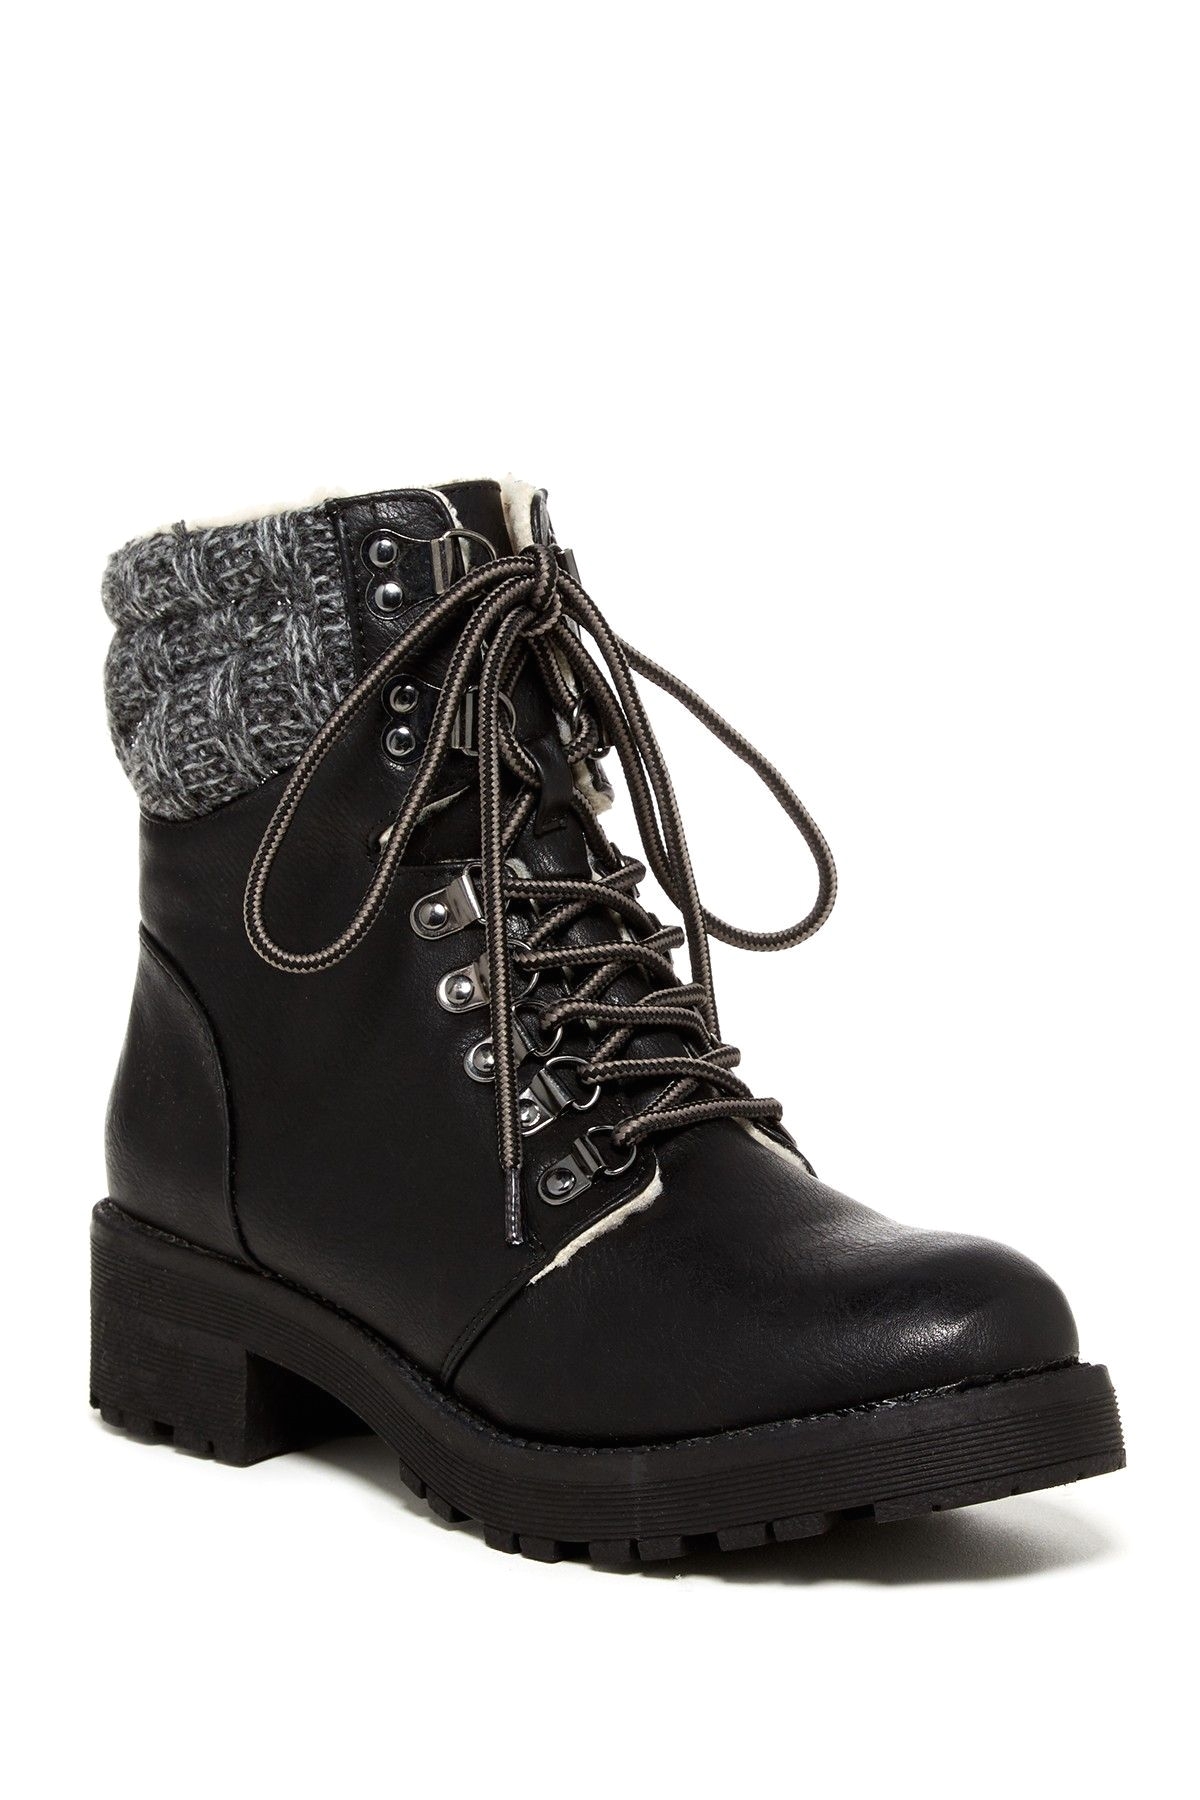 mia maylynn faux shearling lined hiking boot at nordstrom rack free shipping on orders